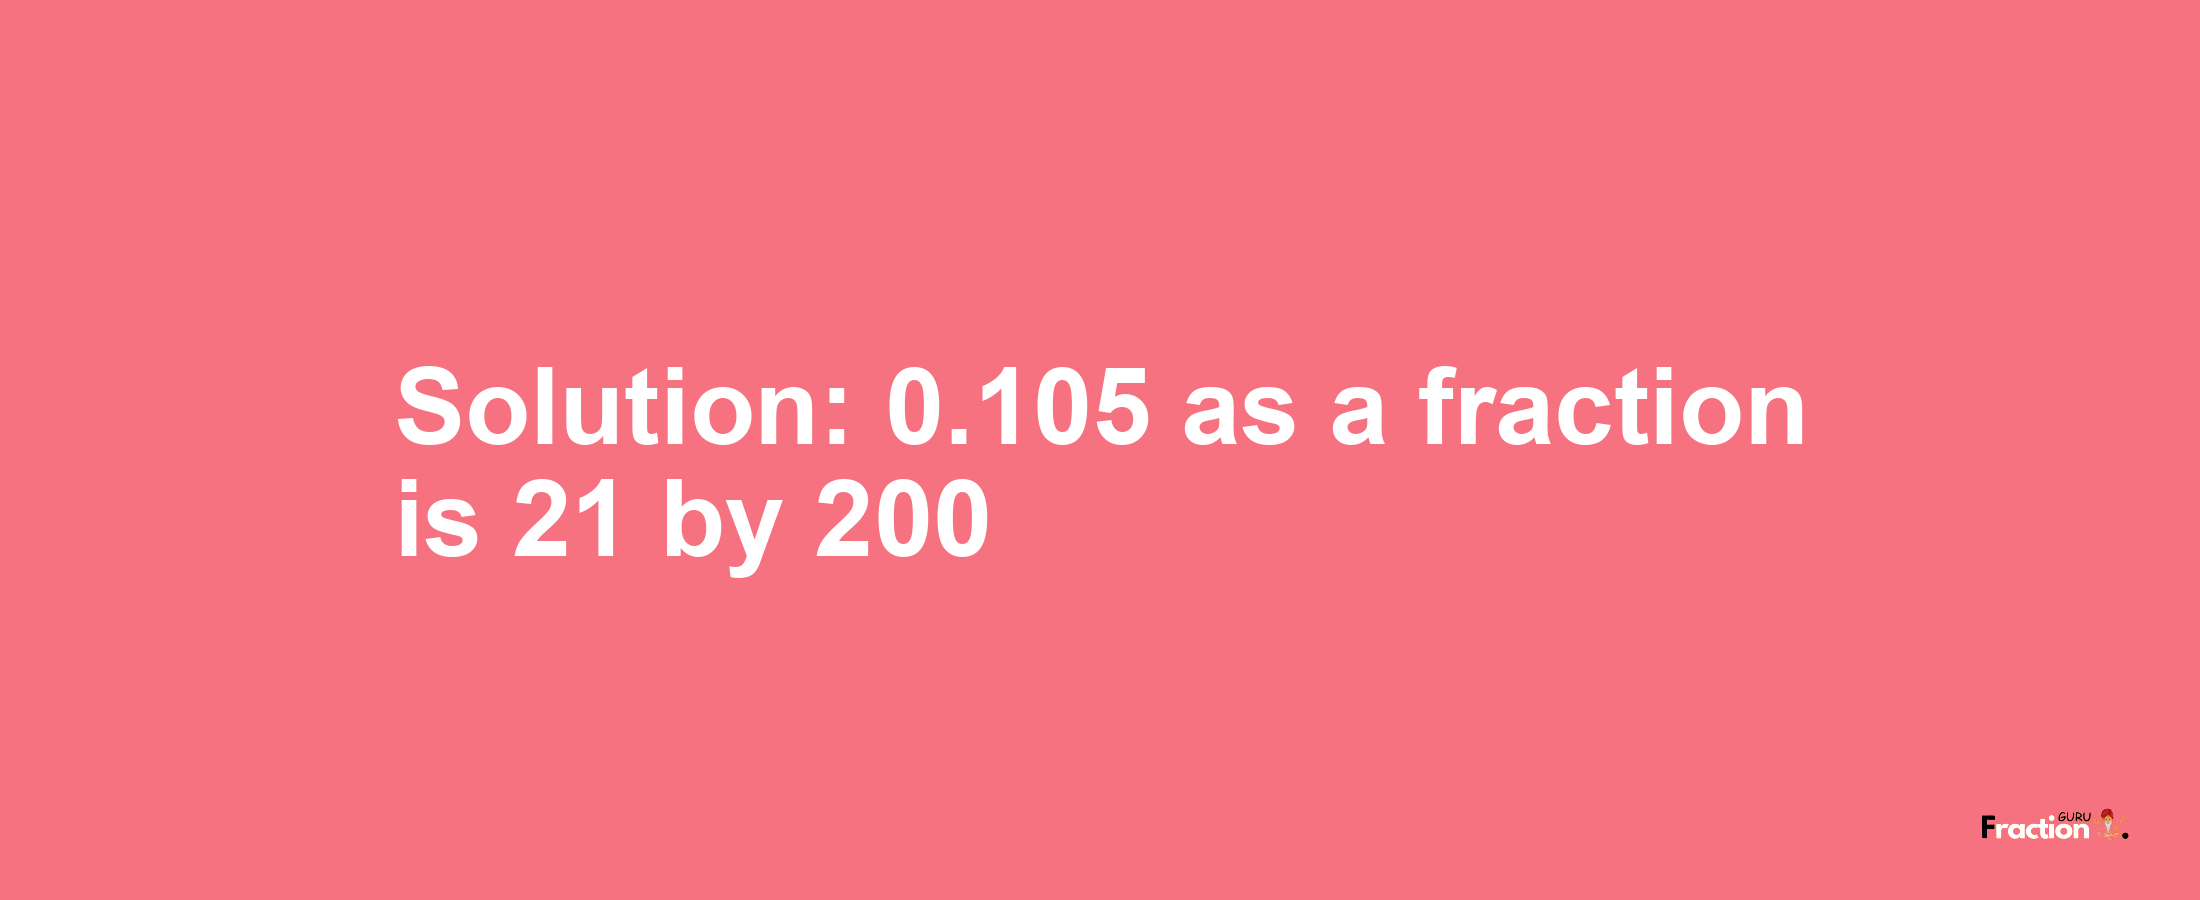 Solution:0.105 as a fraction is 21/200